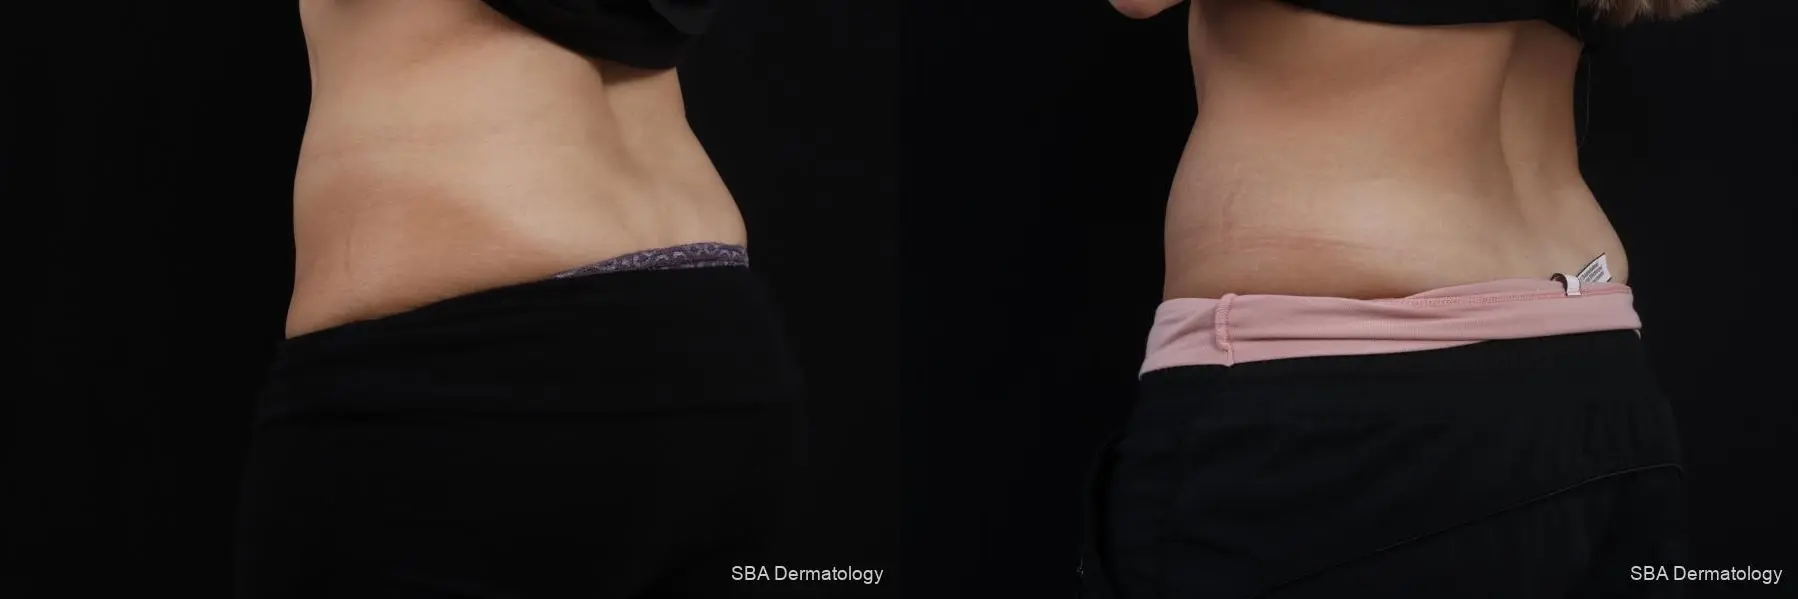 Coolsculpting: Patient 8 - Before and After 4